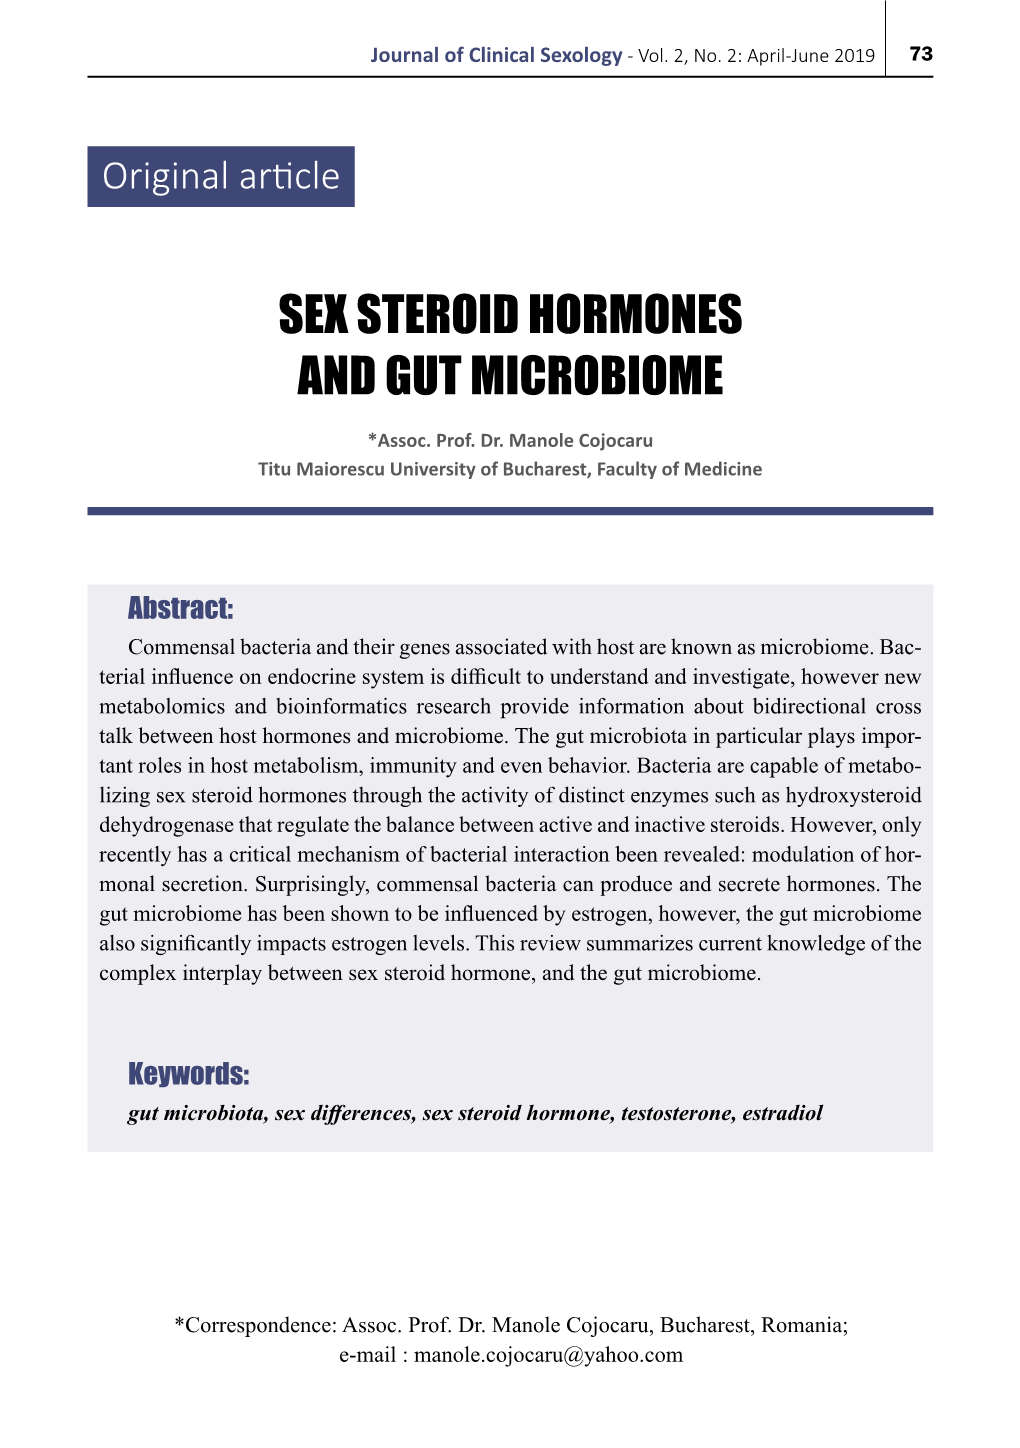 Sex Steroid Hormones and Gut Microbiome